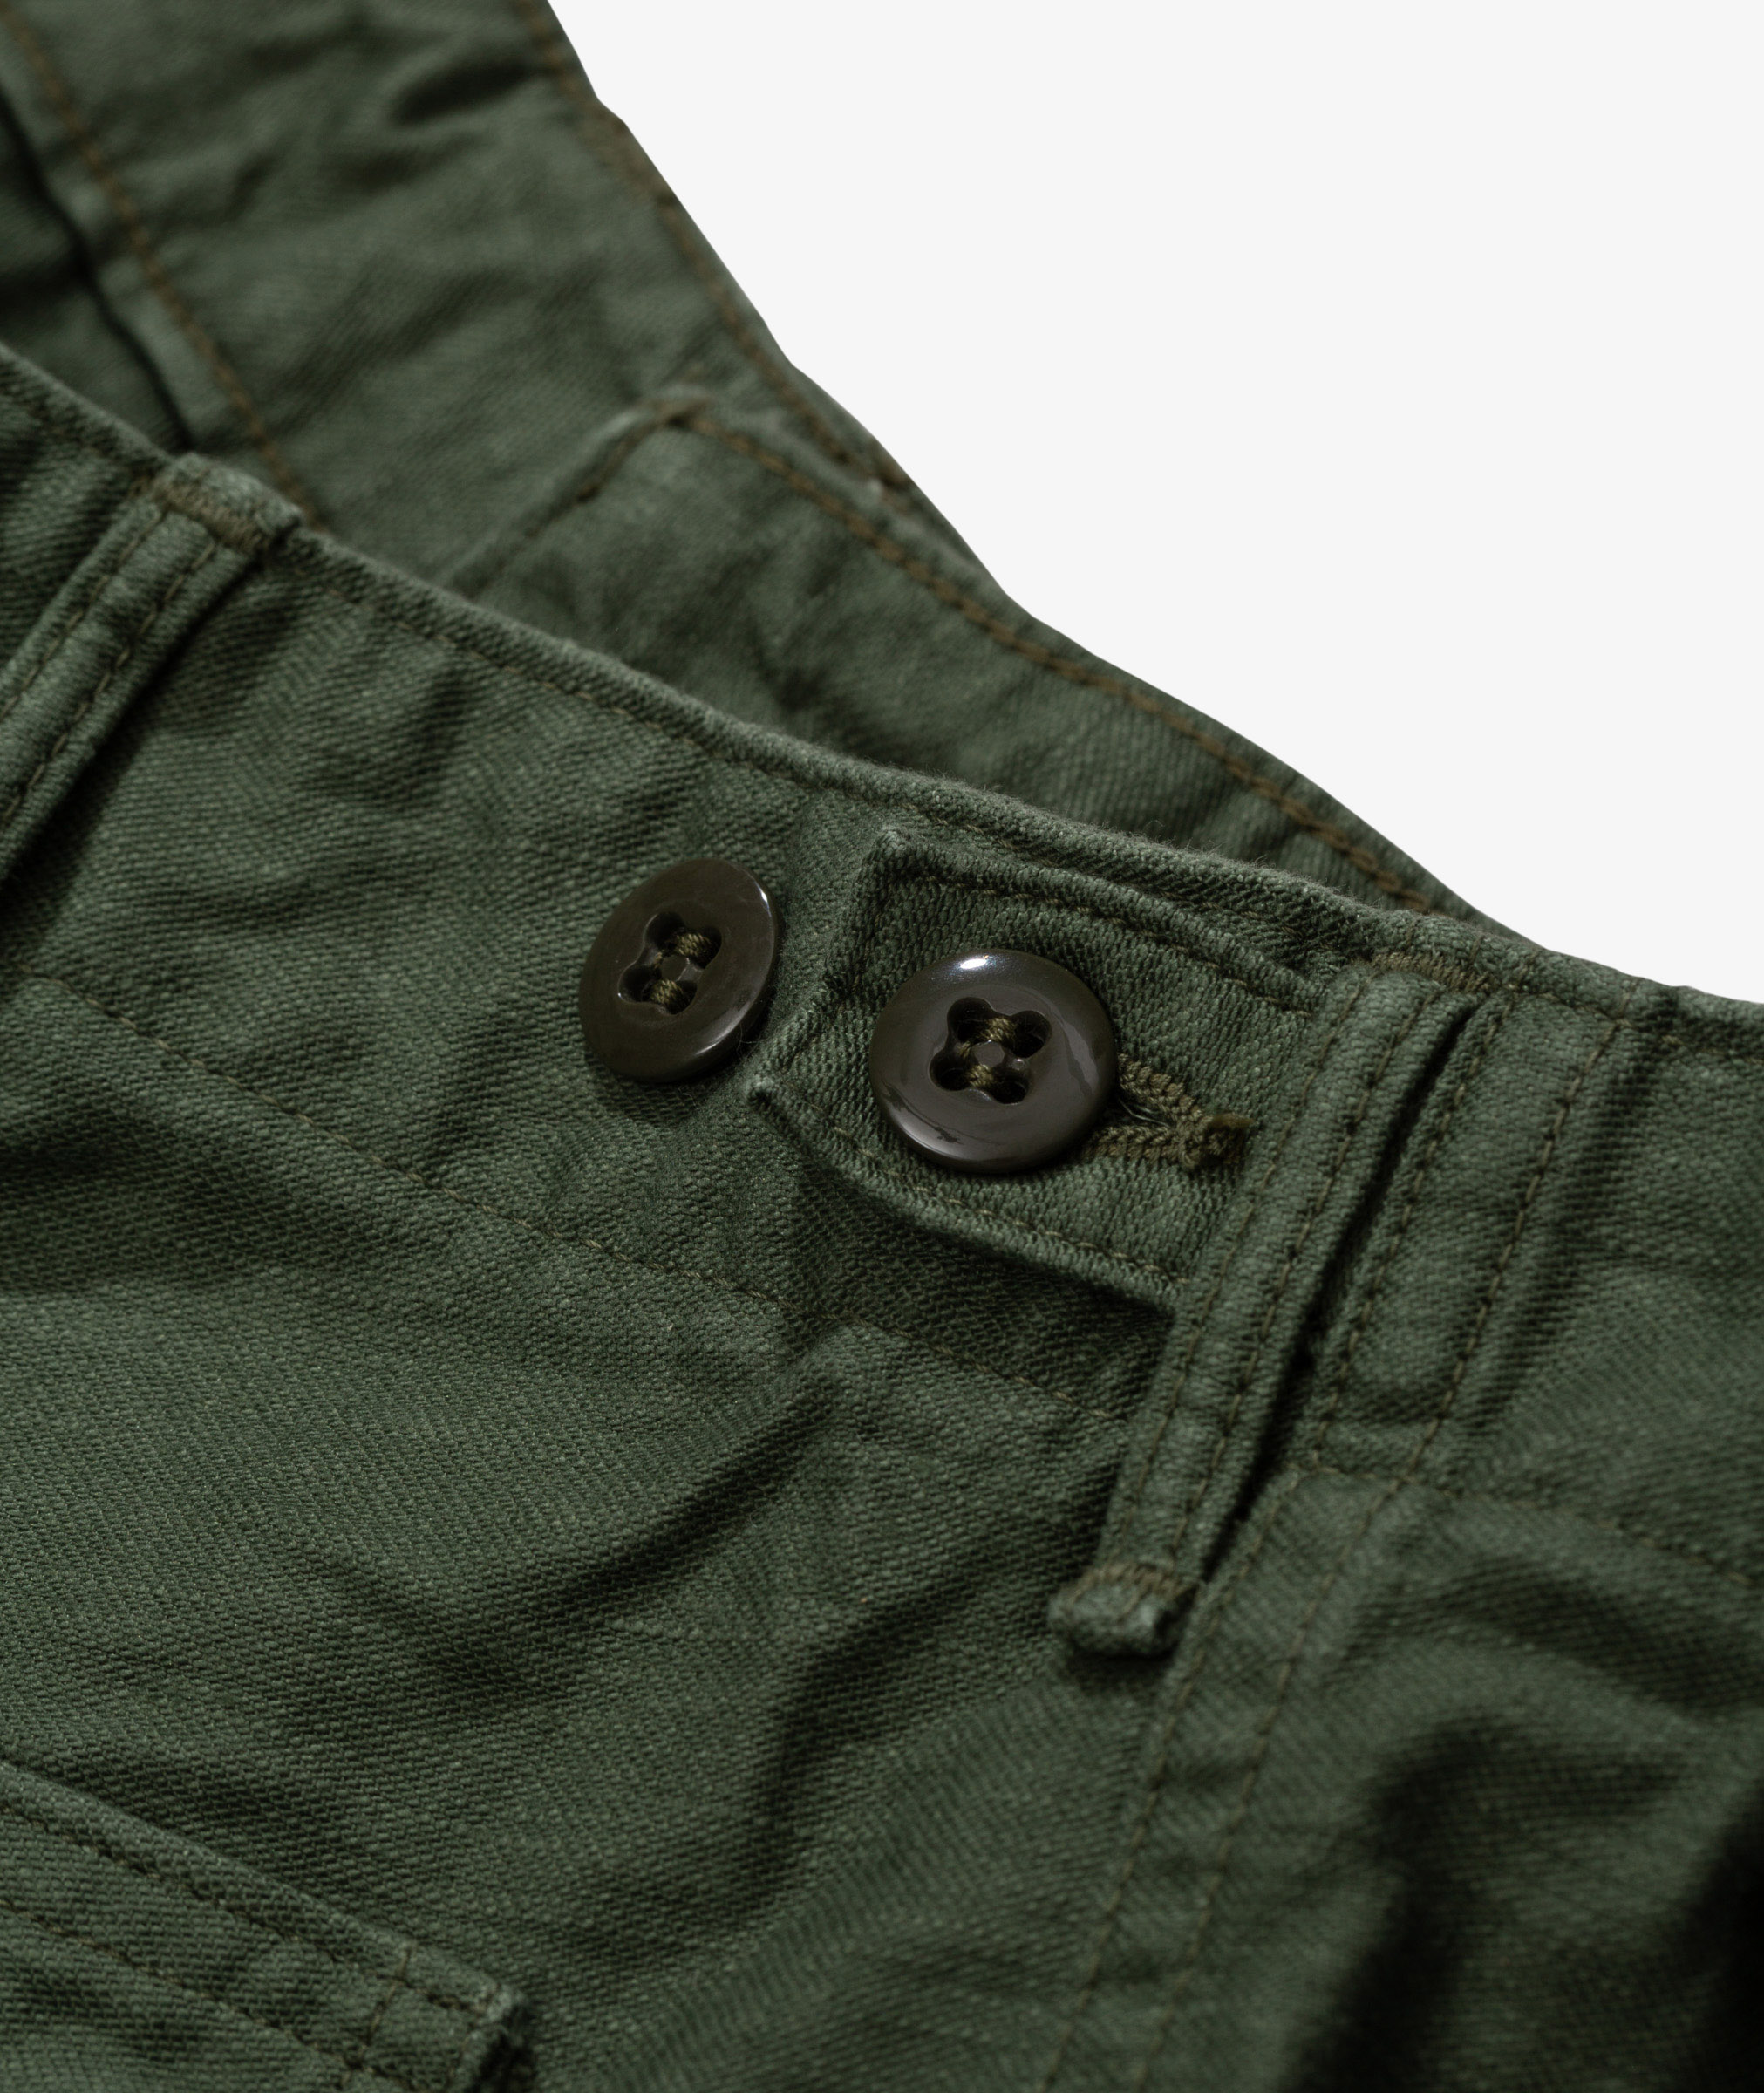 Norse Store | Shipping Worldwide - Slim Fit Fatigue Pant by orSlow